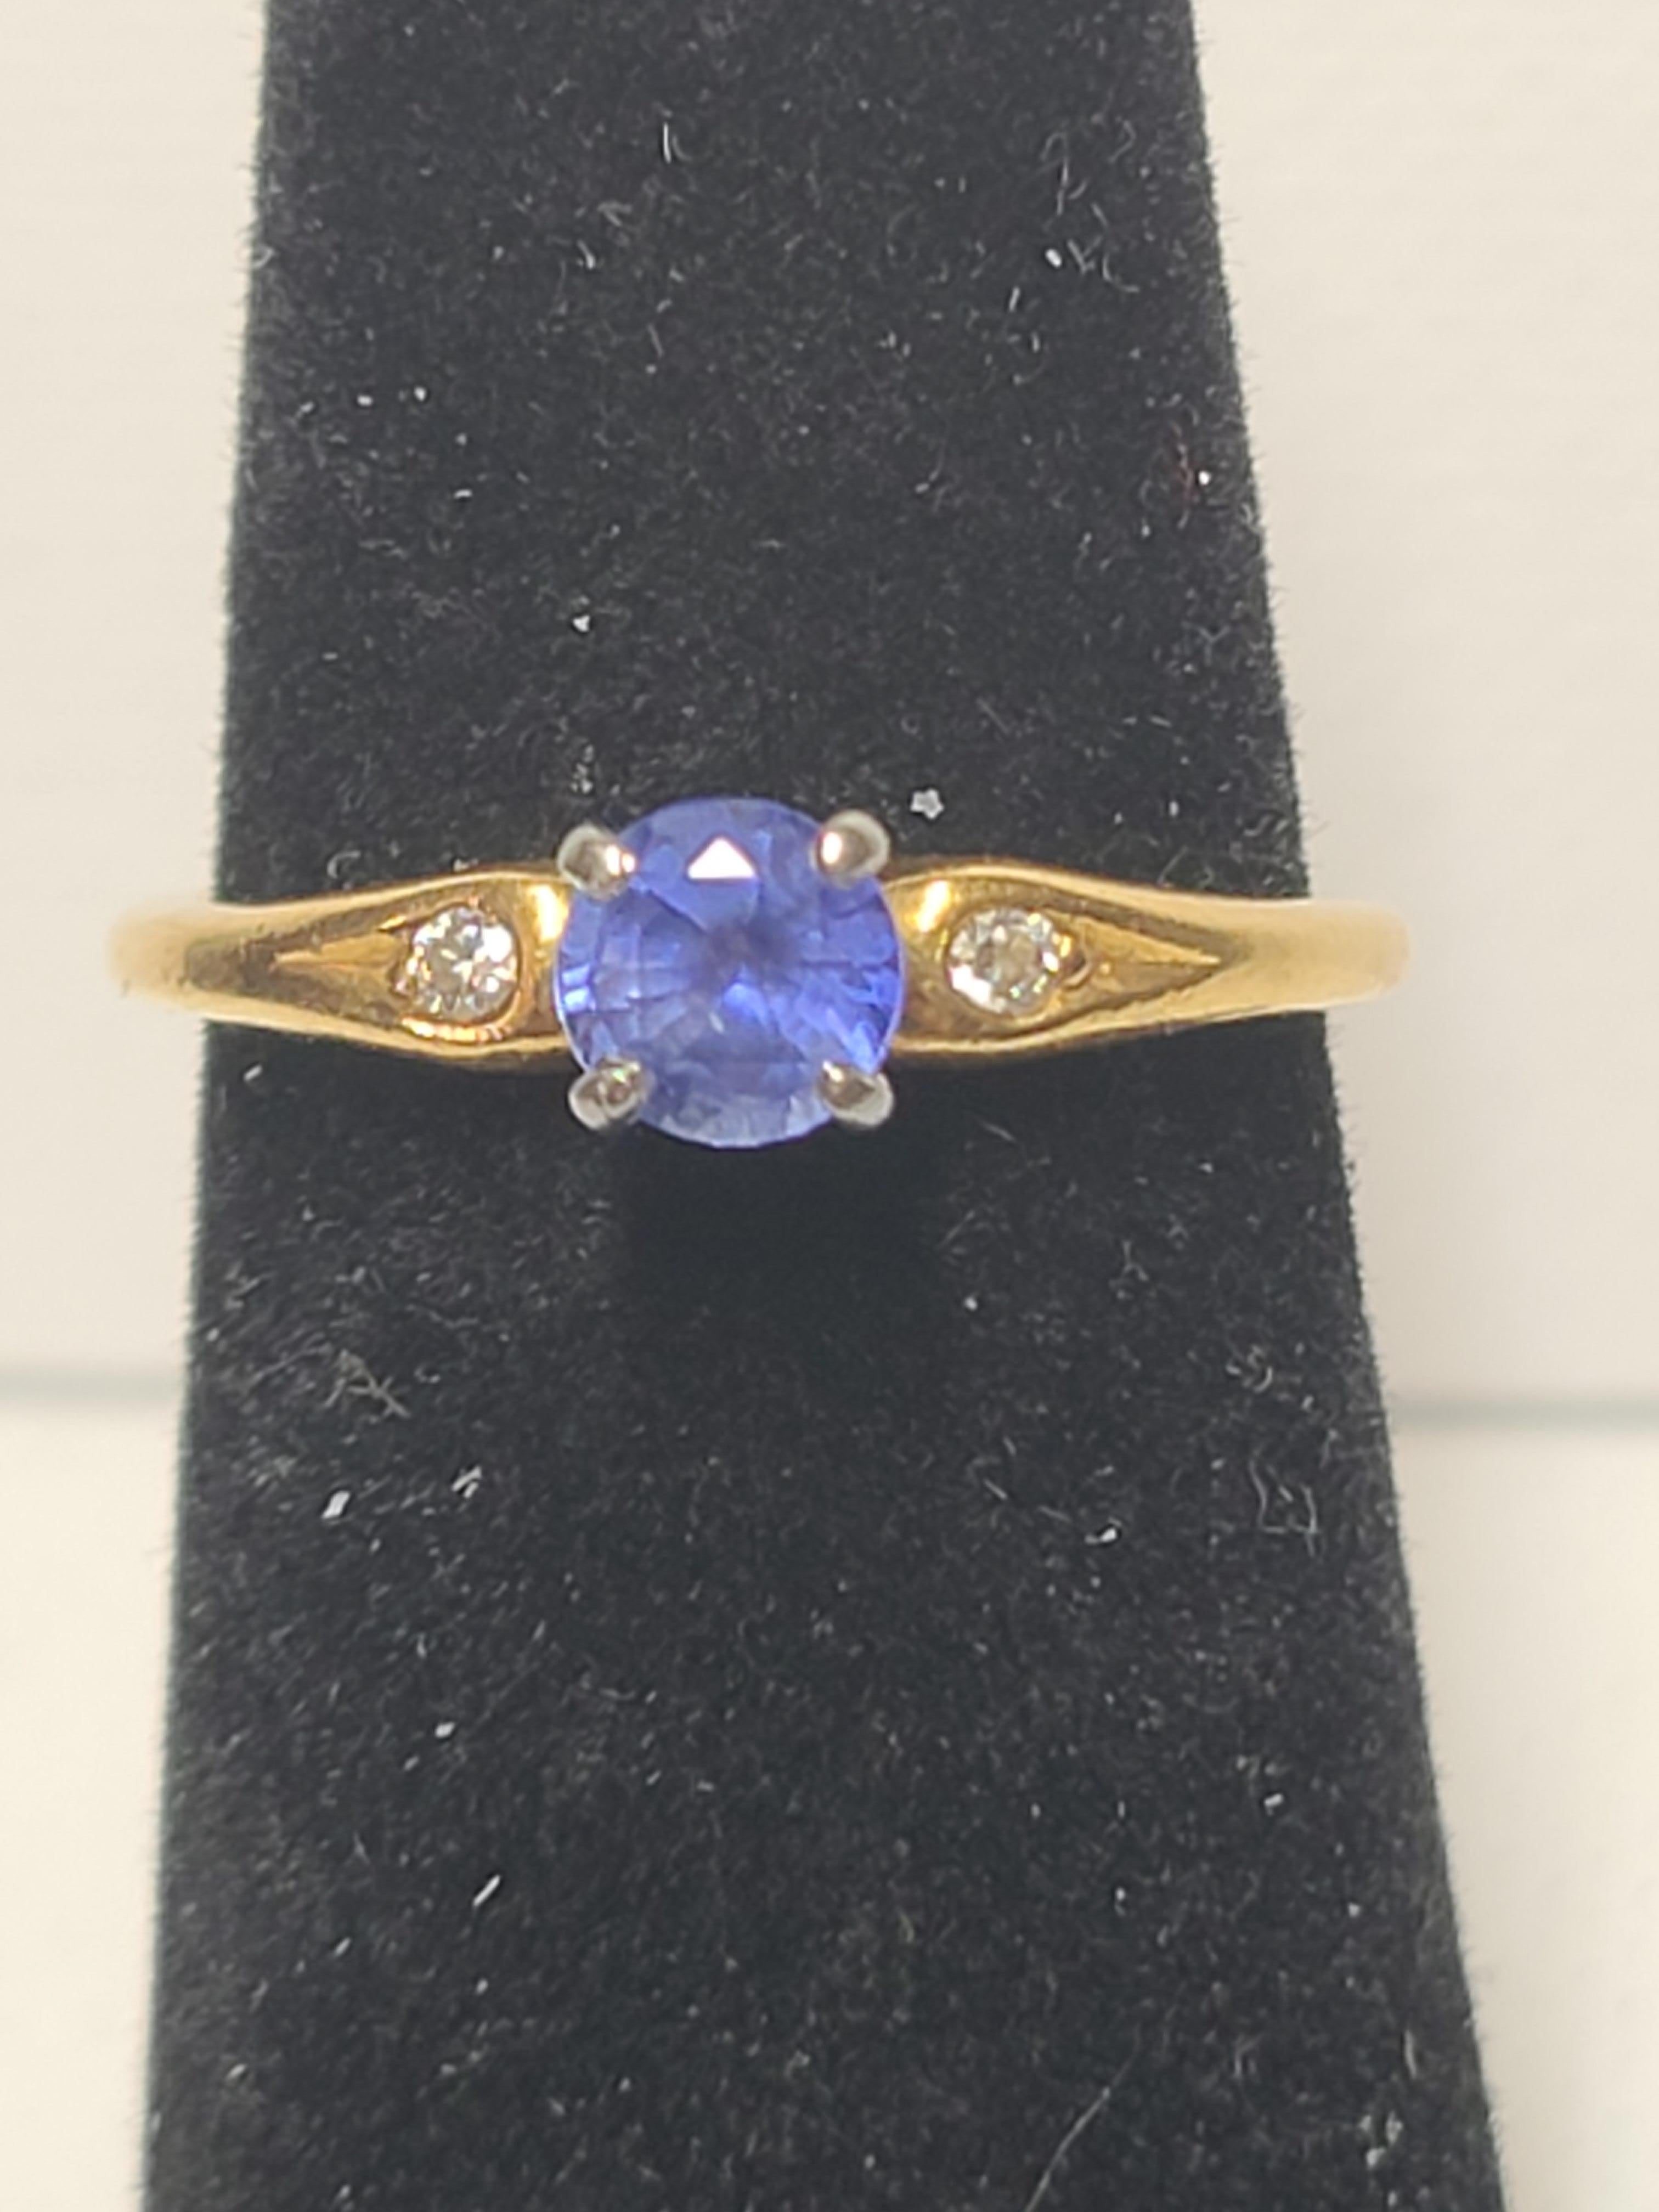 This estate found vintage ring by Jabel is set in 18K Yellow Gold featuring a 4.7mm round cut sapphire set in a platinum head with diamond accents on each shoulder. 
The ring is size 6 (US) and weighs 2.9 grams.